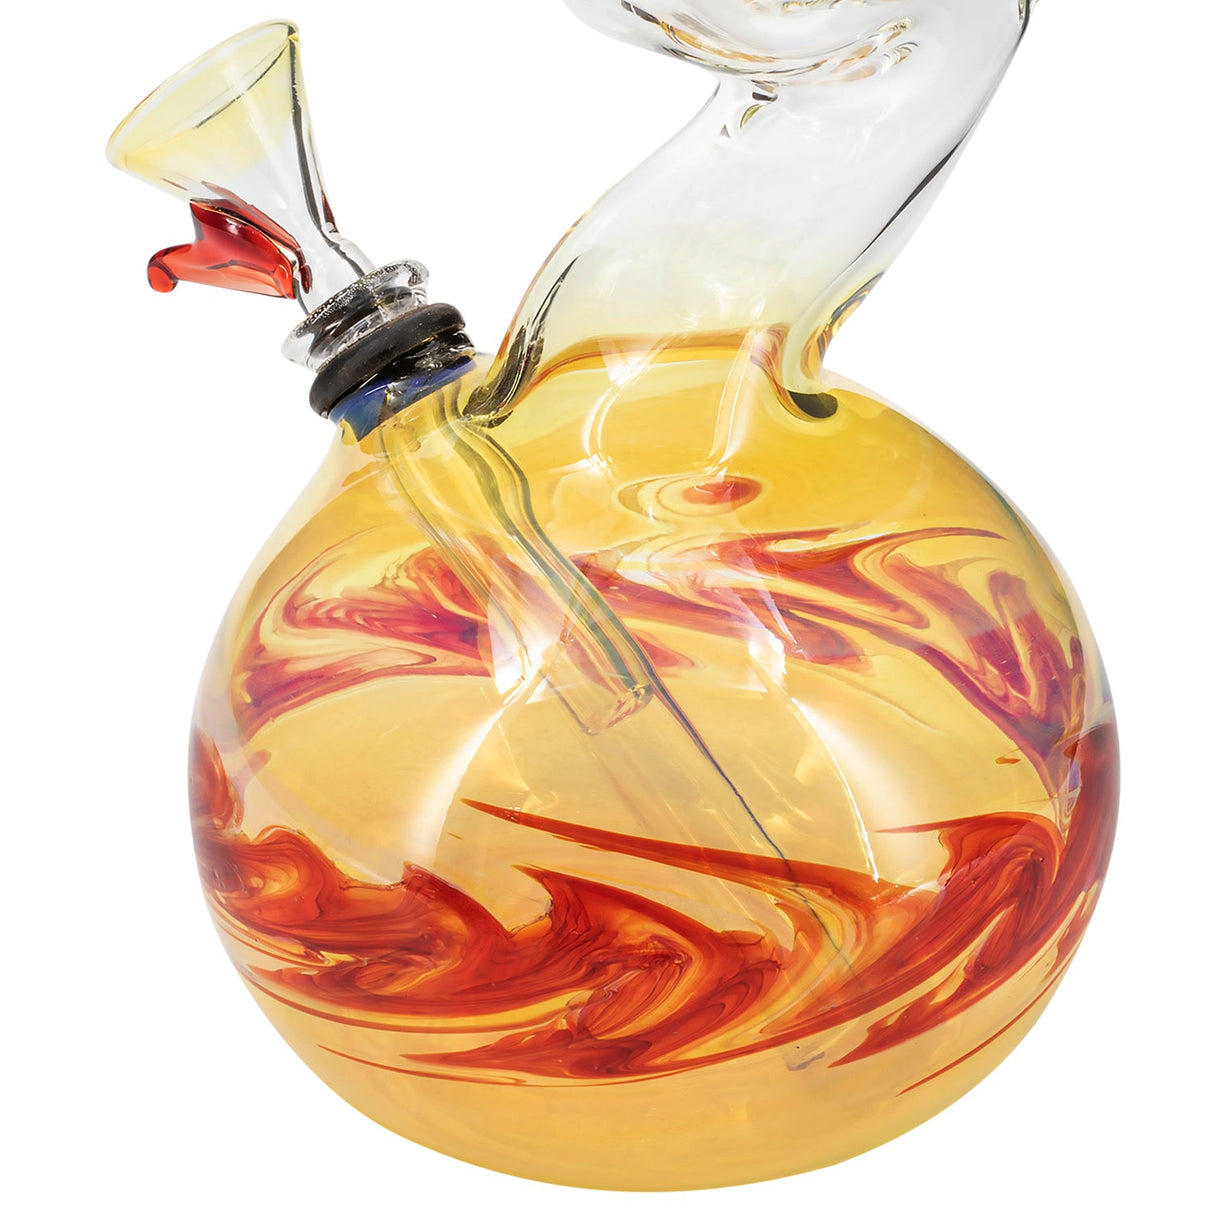 LA Pipes "Switchback" Bubble Base Bong with fiery swirl design, side view, 12" height, USA made